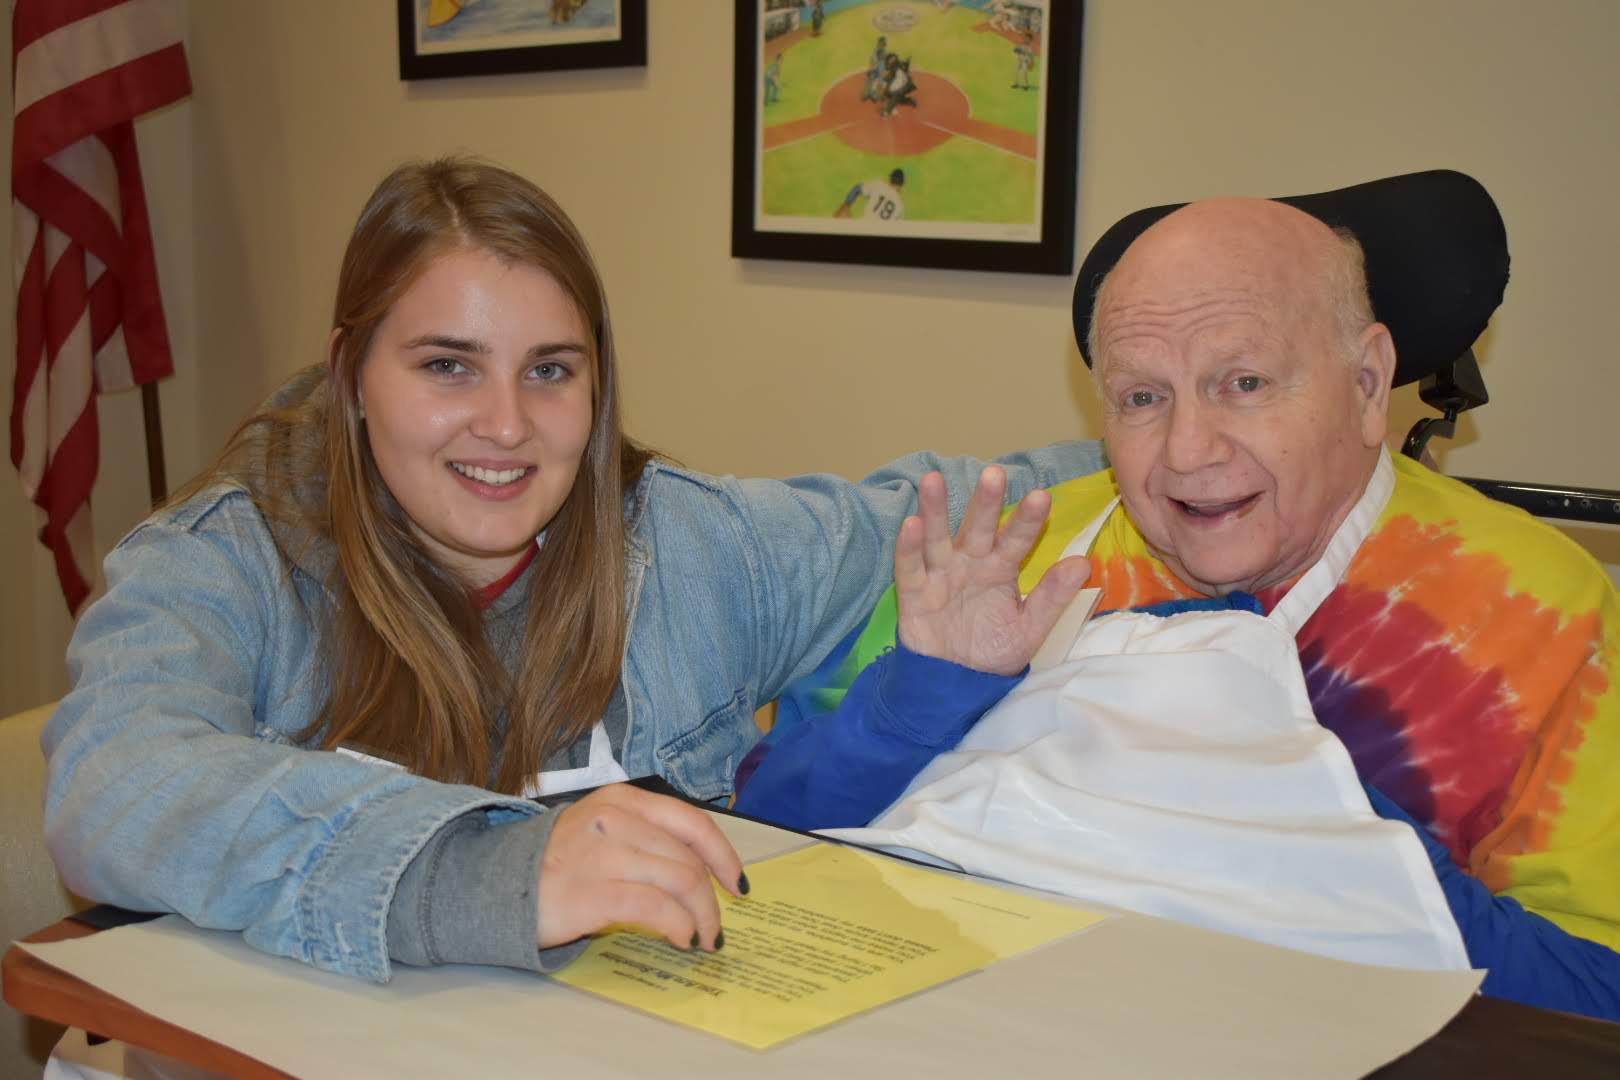 Gerontology student with older adult wearing a colorful shirt